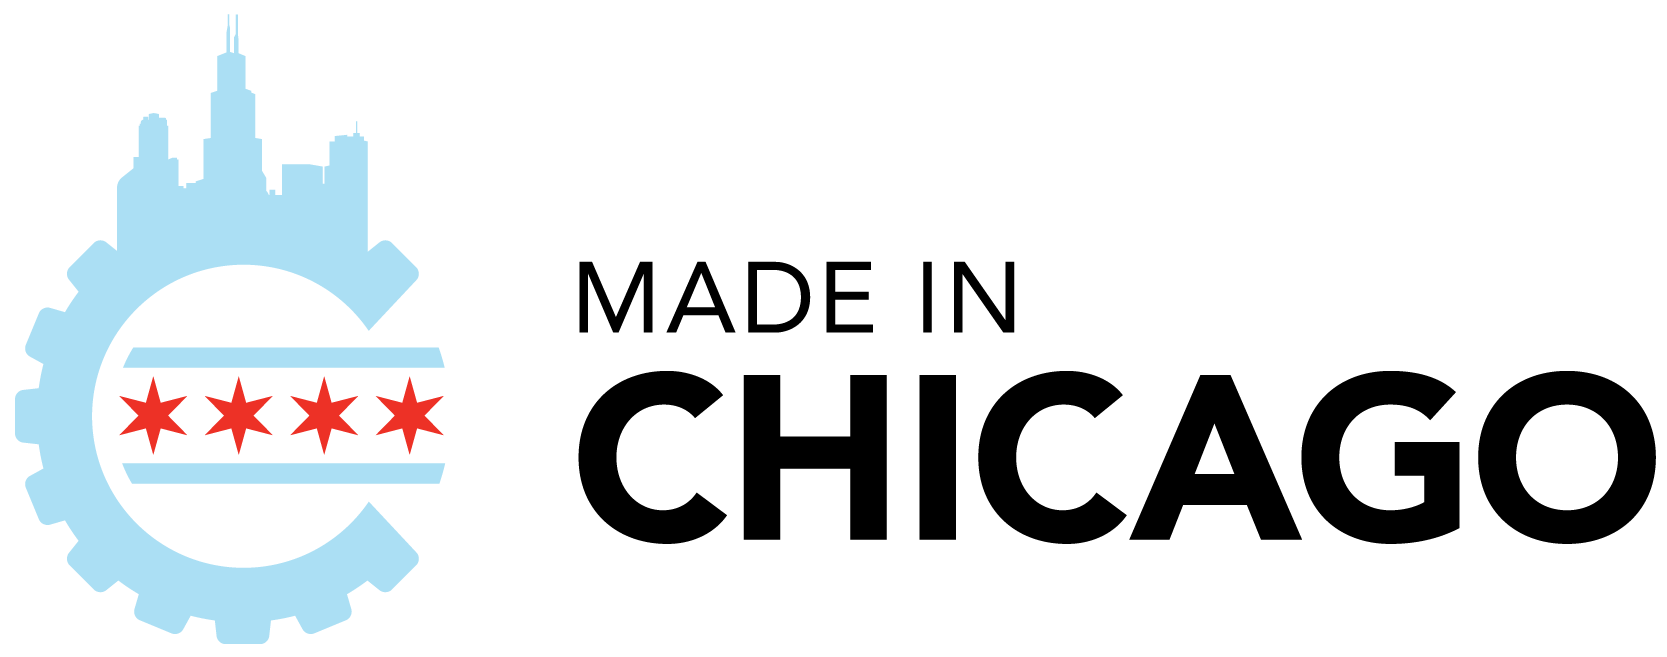 Chicago Logo - About Made in Chicago. Made in Chicago